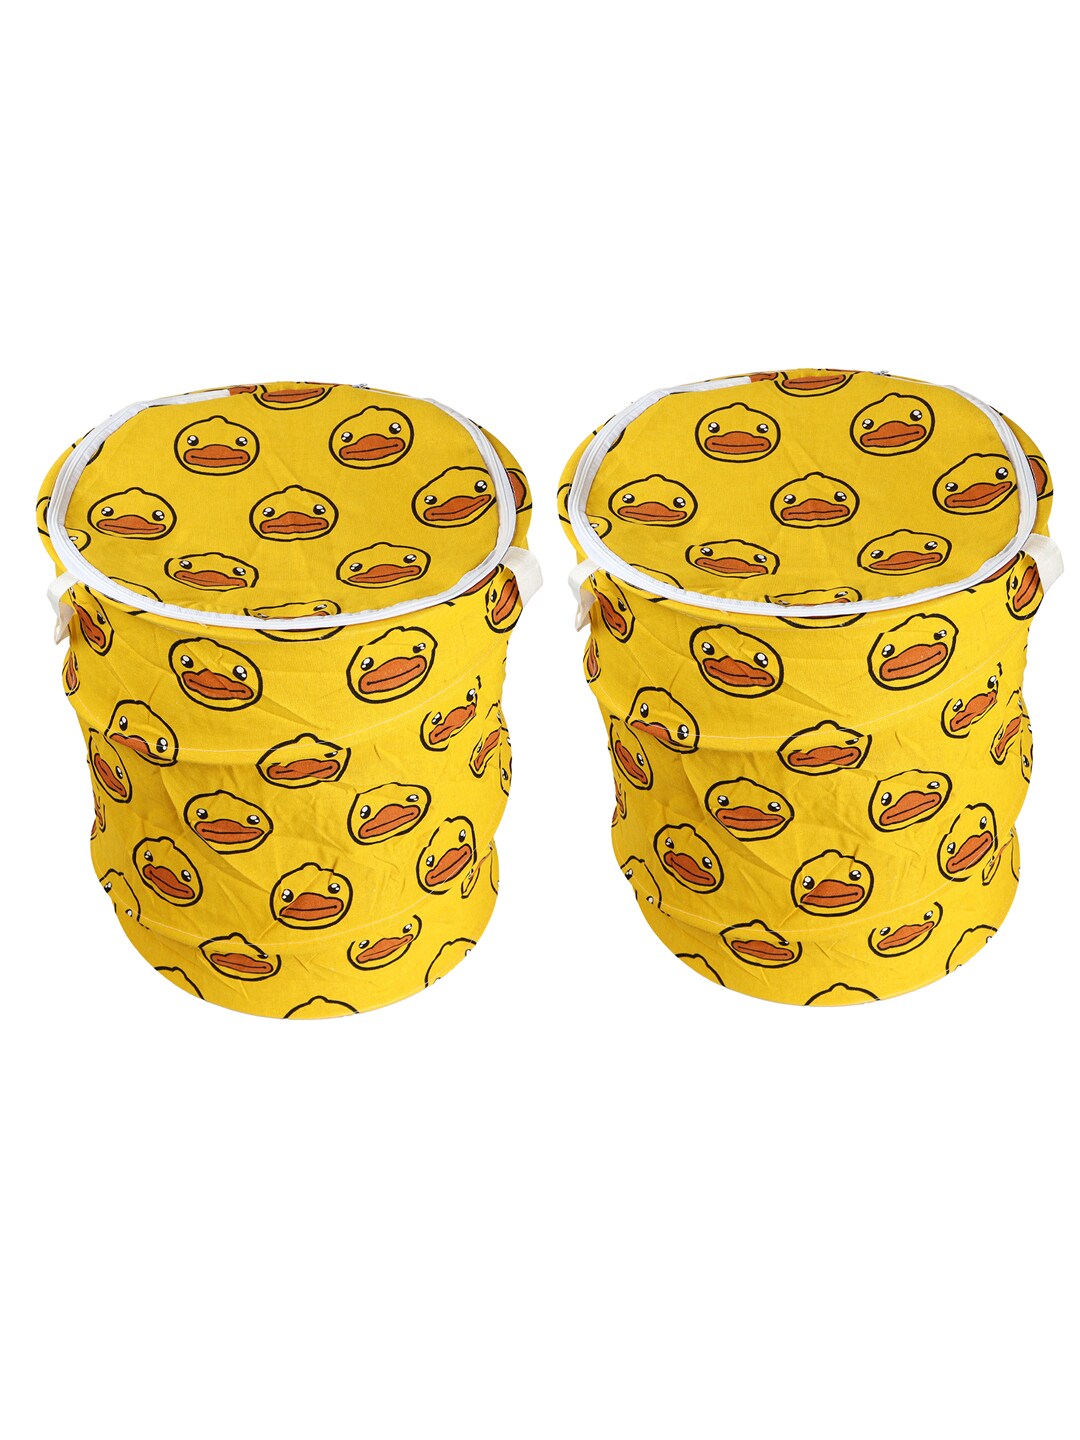 OddCroft Set Of 2 Printed Foldable Laundry Baskets Price in India